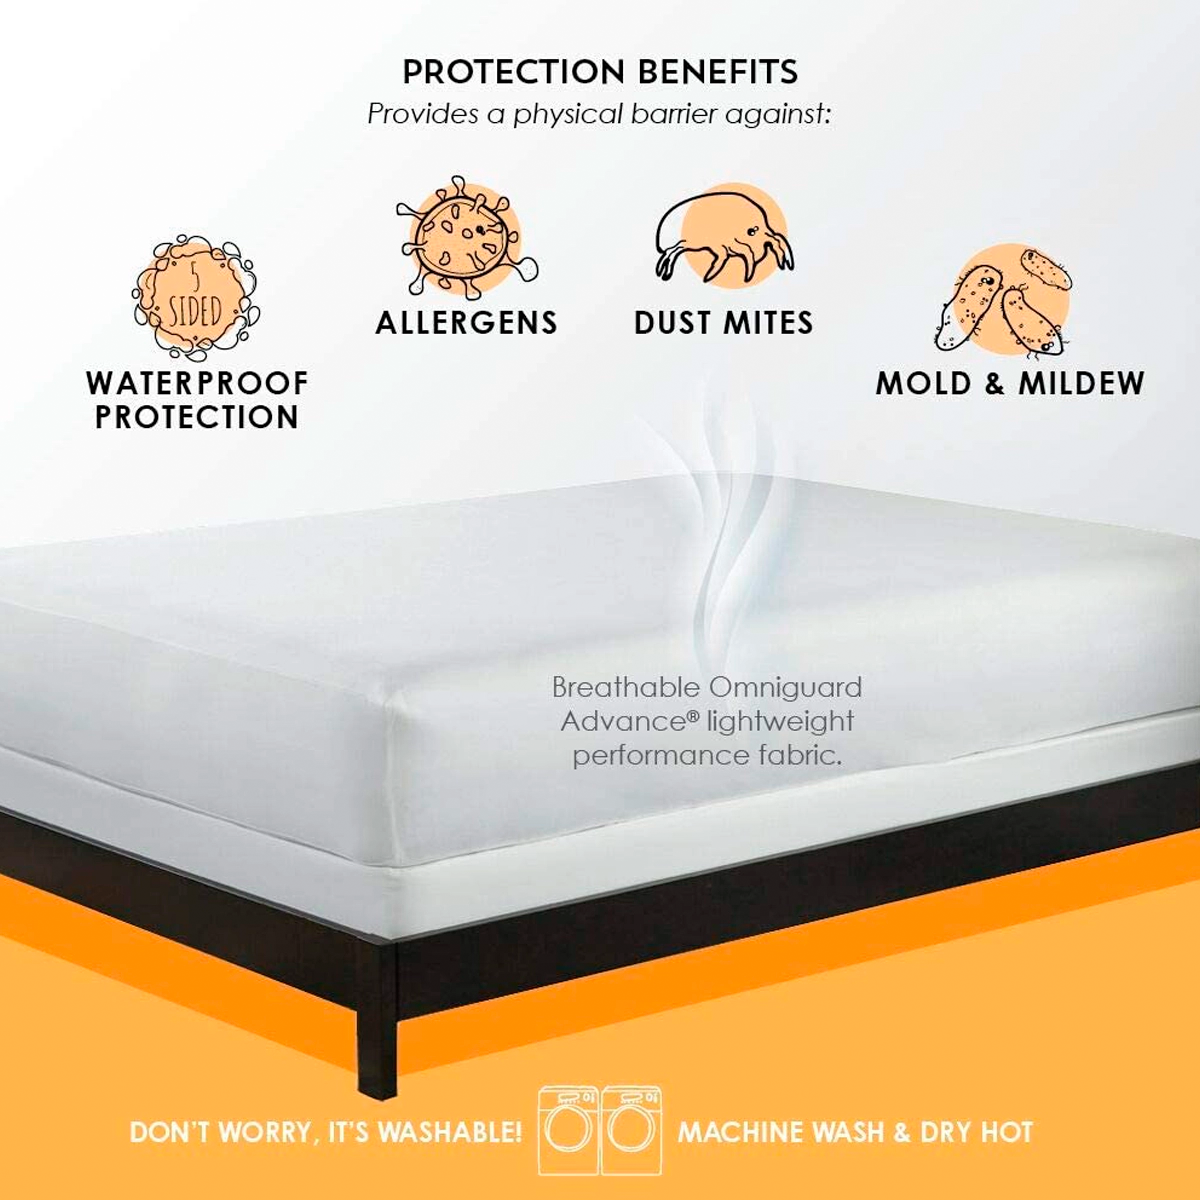 Kids Mattress Protector by Purecare Protection Benefits